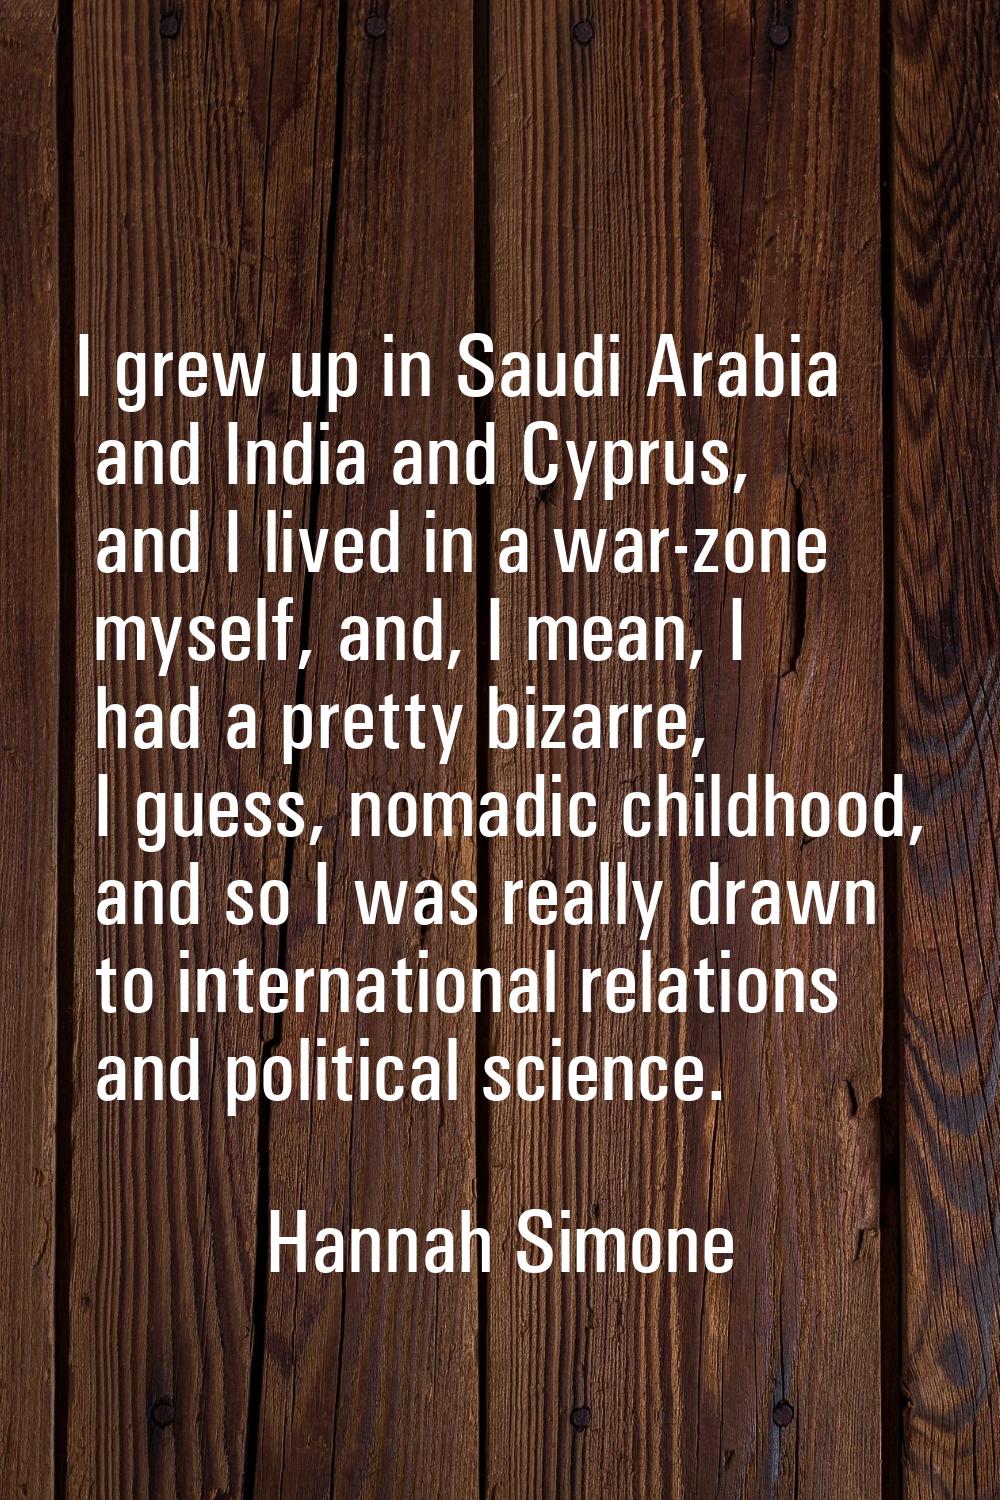 I grew up in Saudi Arabia and India and Cyprus, and I lived in a war-zone myself, and, I mean, I ha